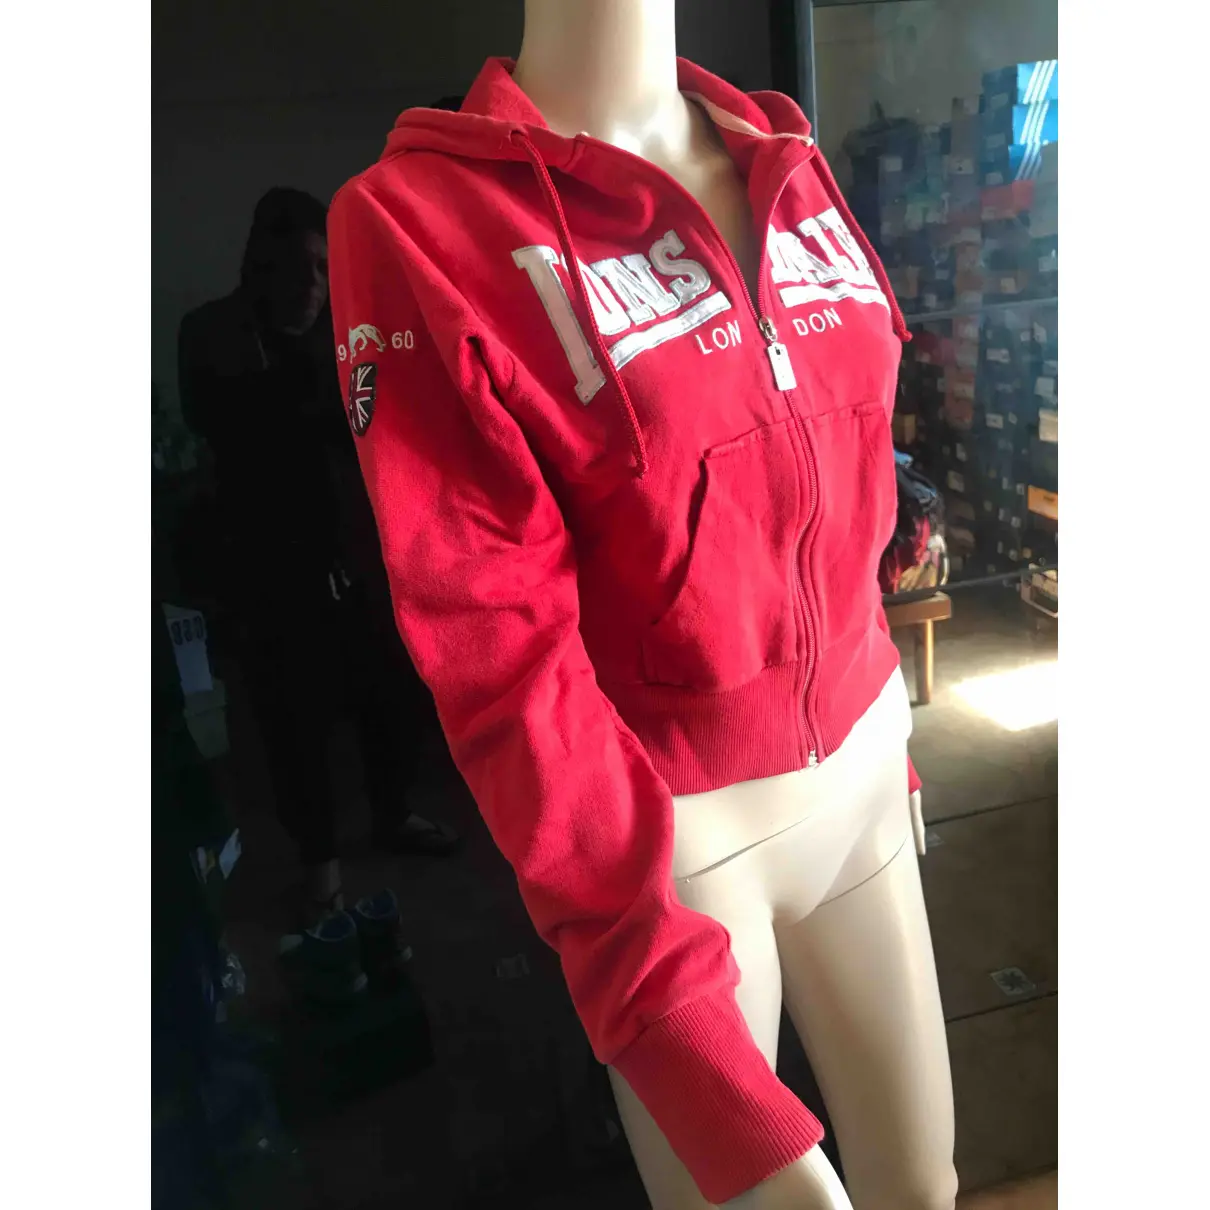 Buy Lonsdale Red Cotton Knitwear online